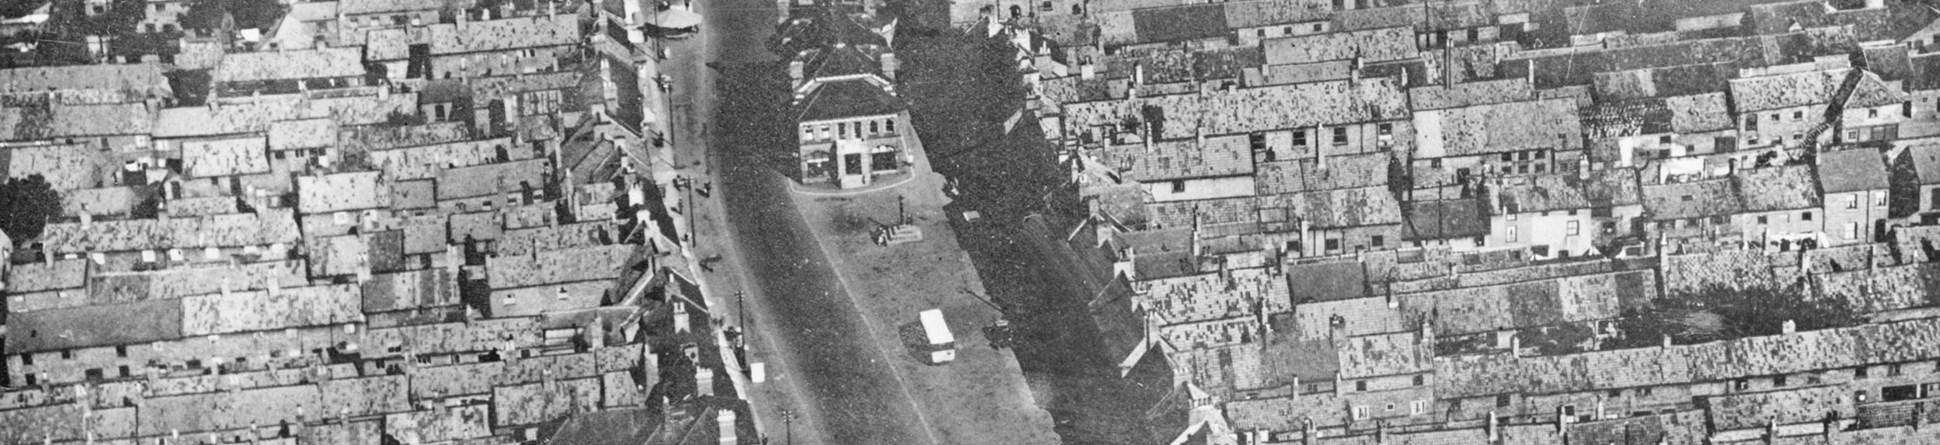 A black and white archive aerial view of a High Street.